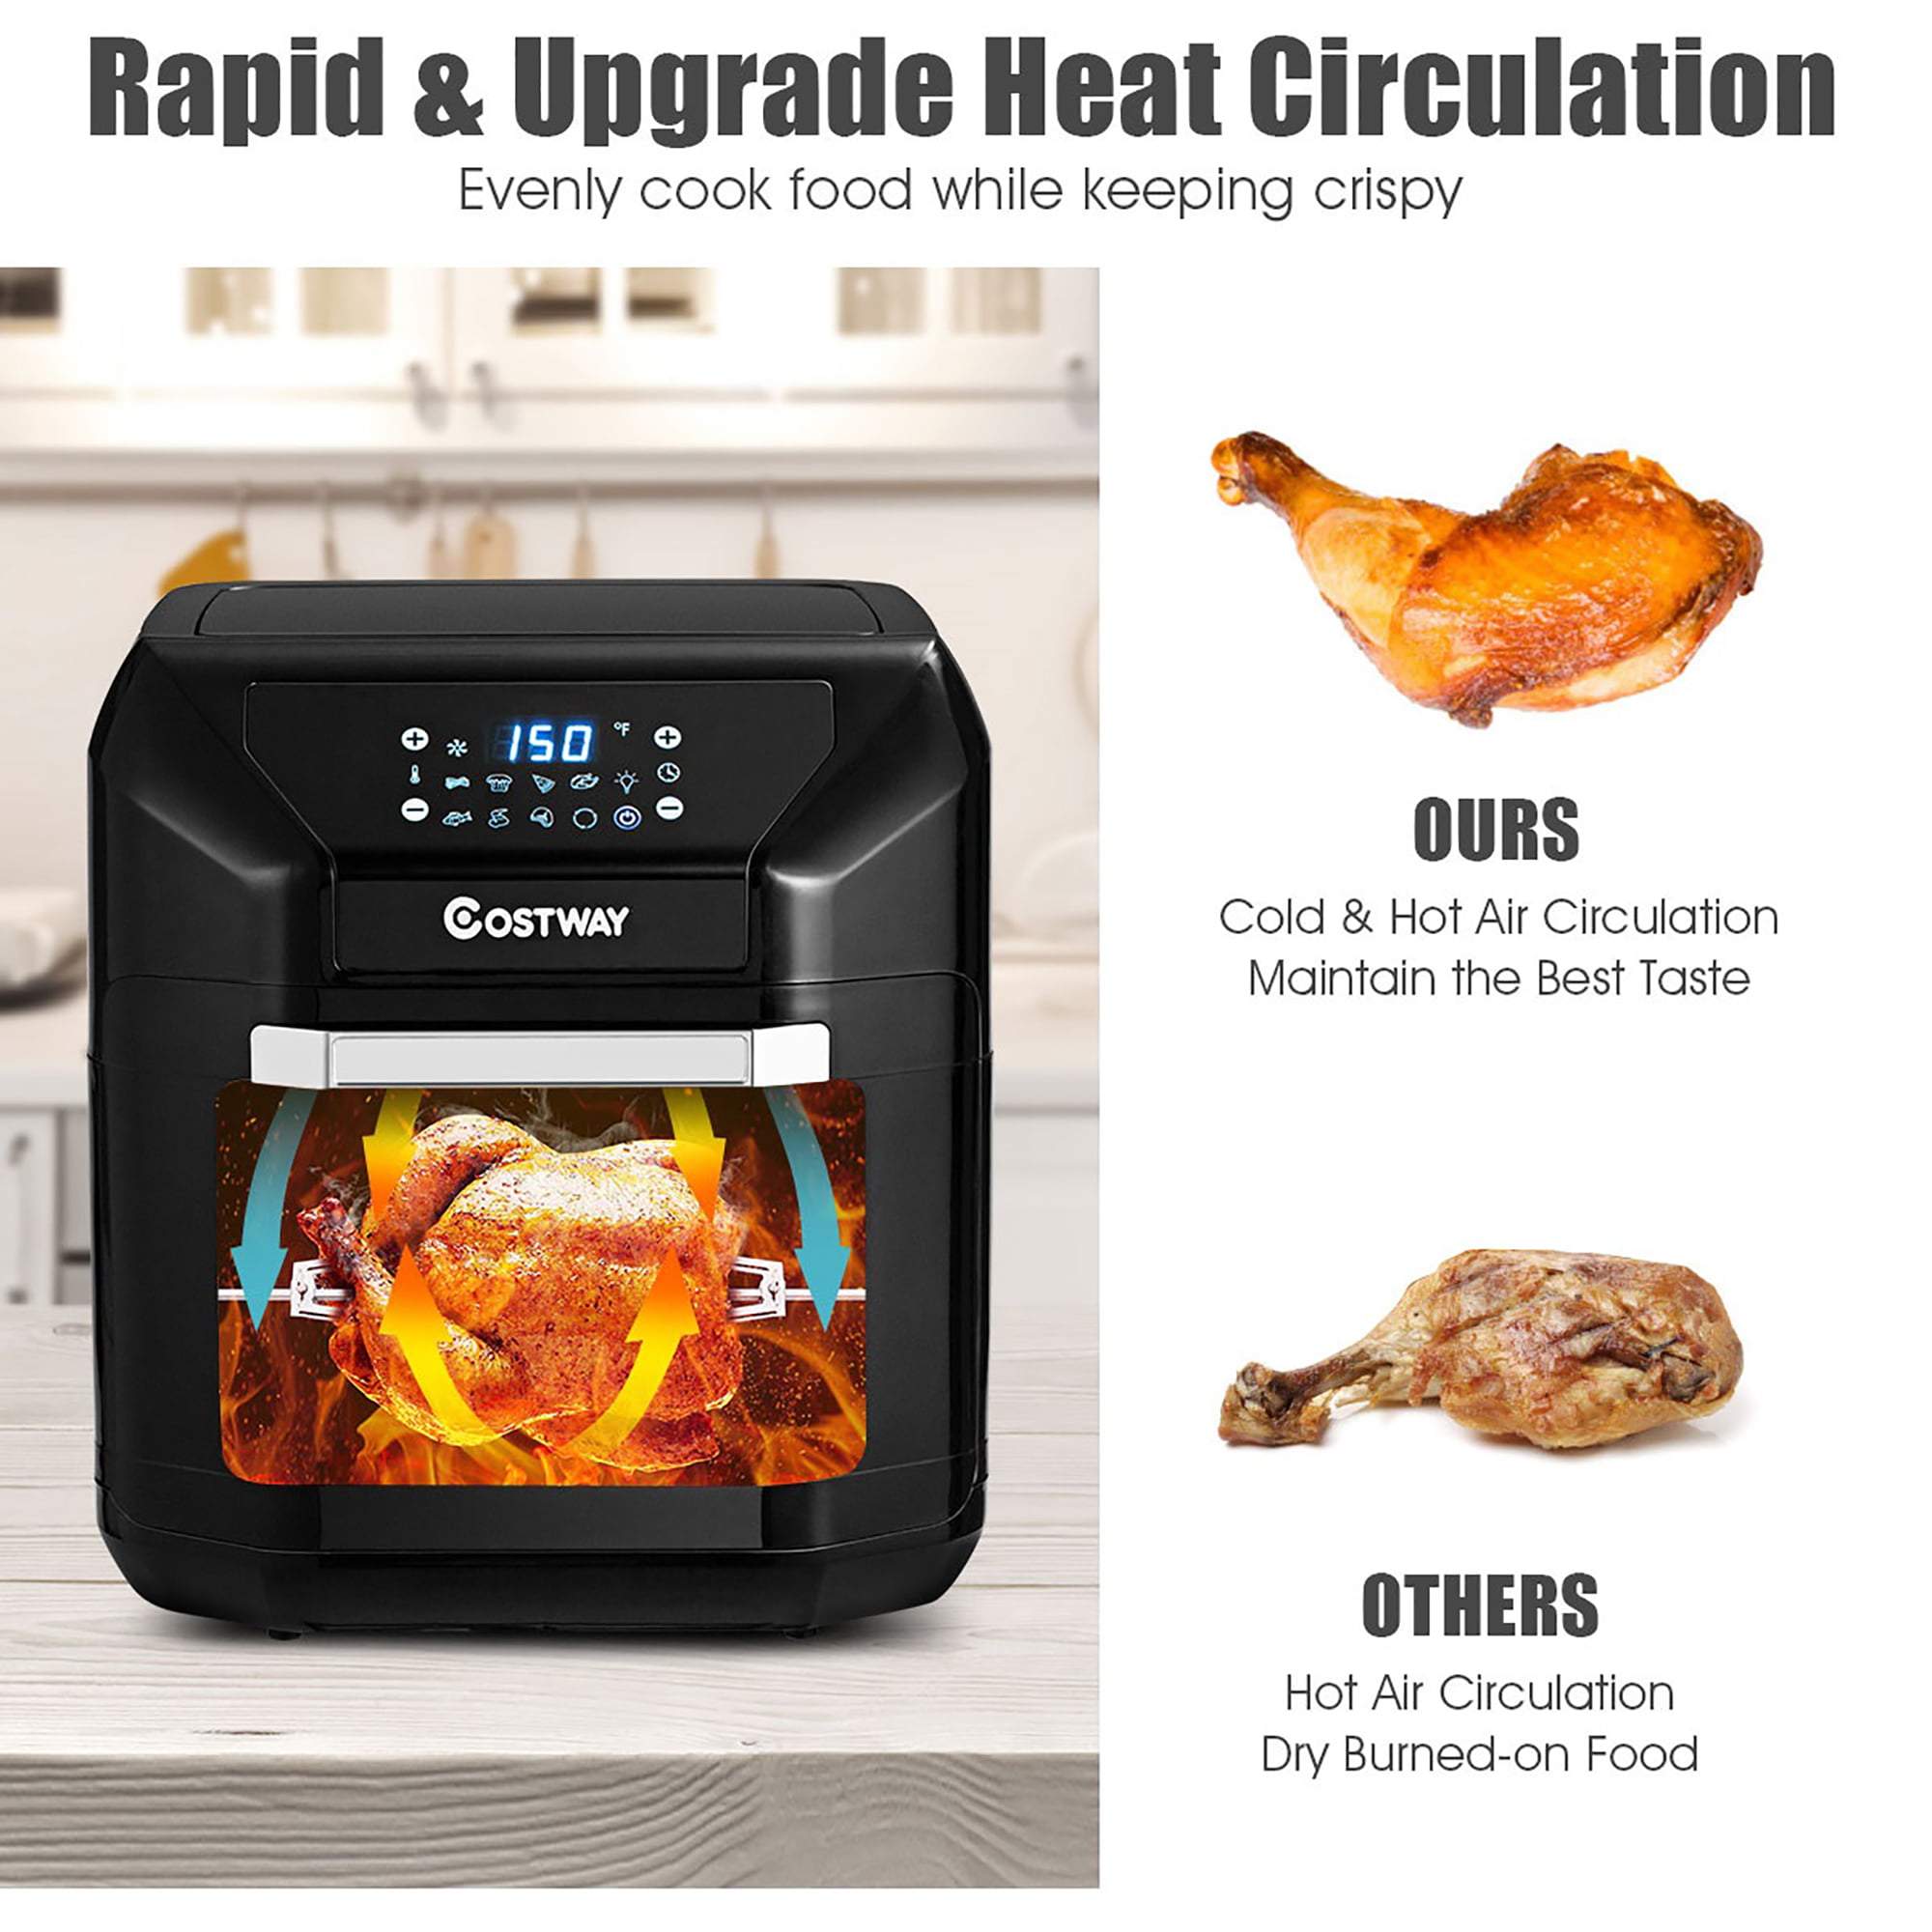 Costway 16-in-1 Air Fryer Oven 15.5 QT Toaster Oven Dehydrator - On Sale -  Bed Bath & Beyond - 32307790